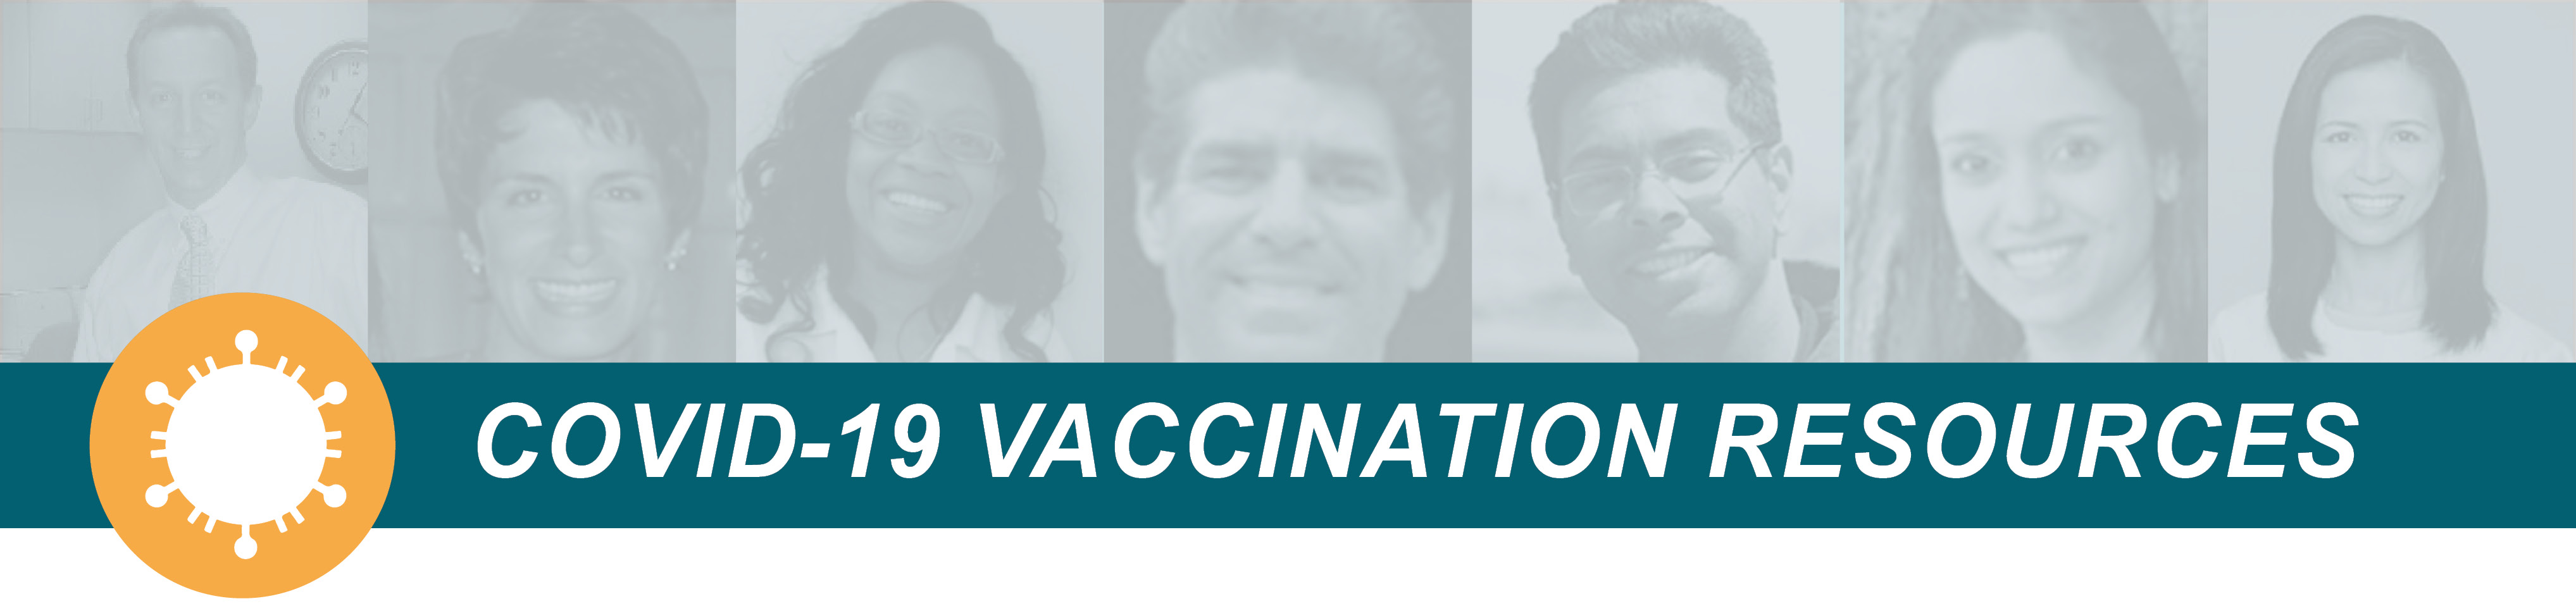 COVID-19 Vaccination Resources